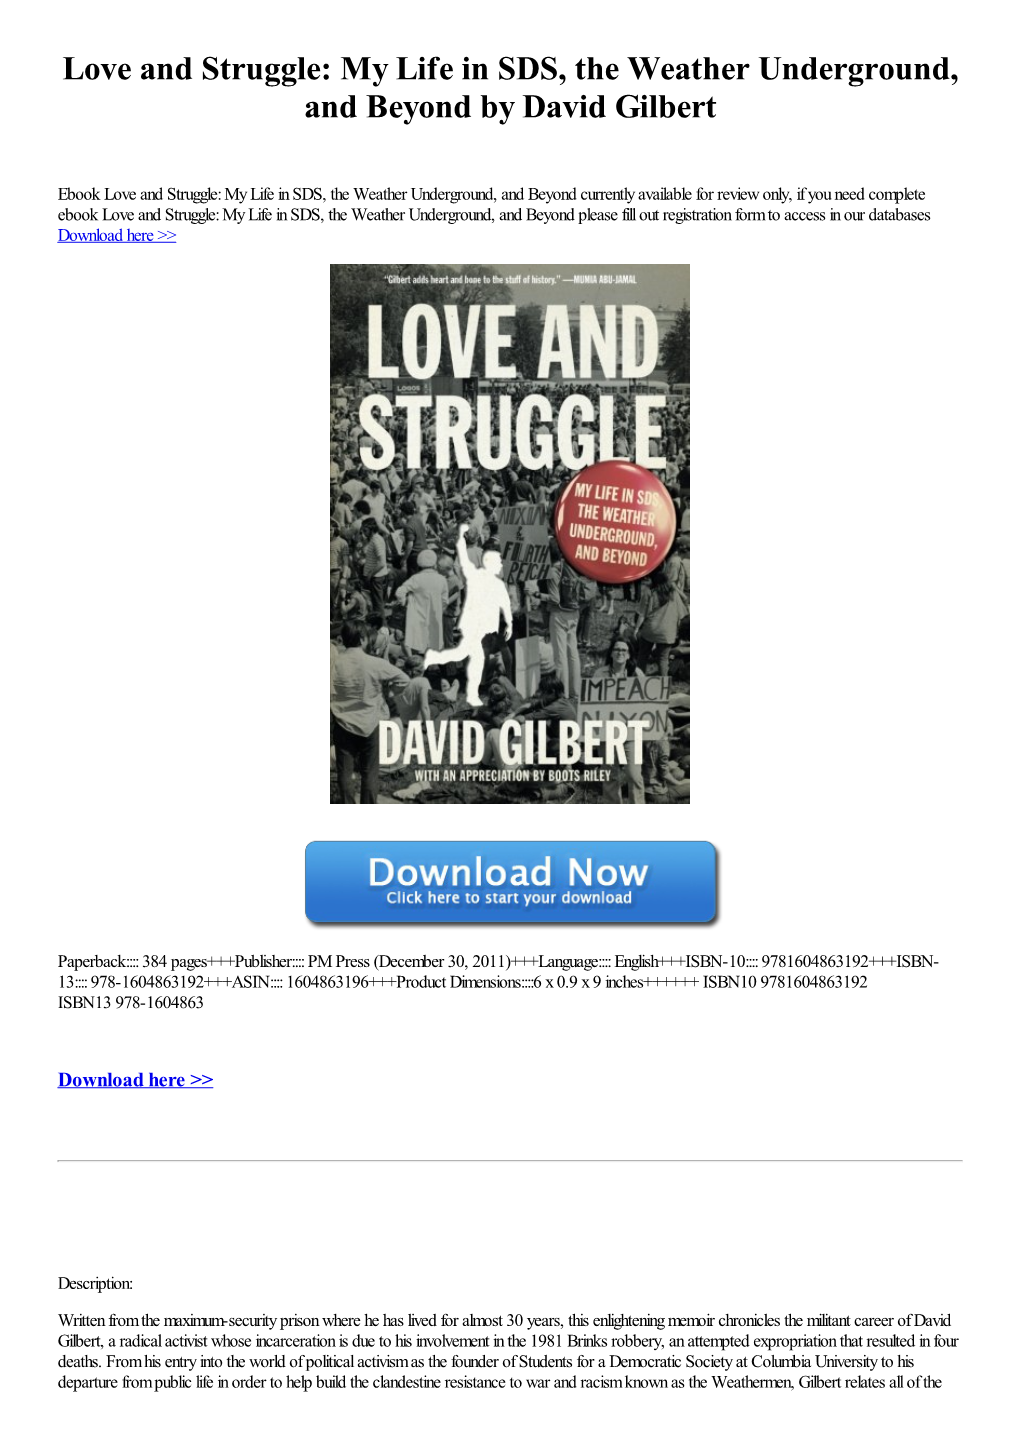 Love and Struggle: My Life in SDS, the Weather Underground, and Beyond by David Gilbert